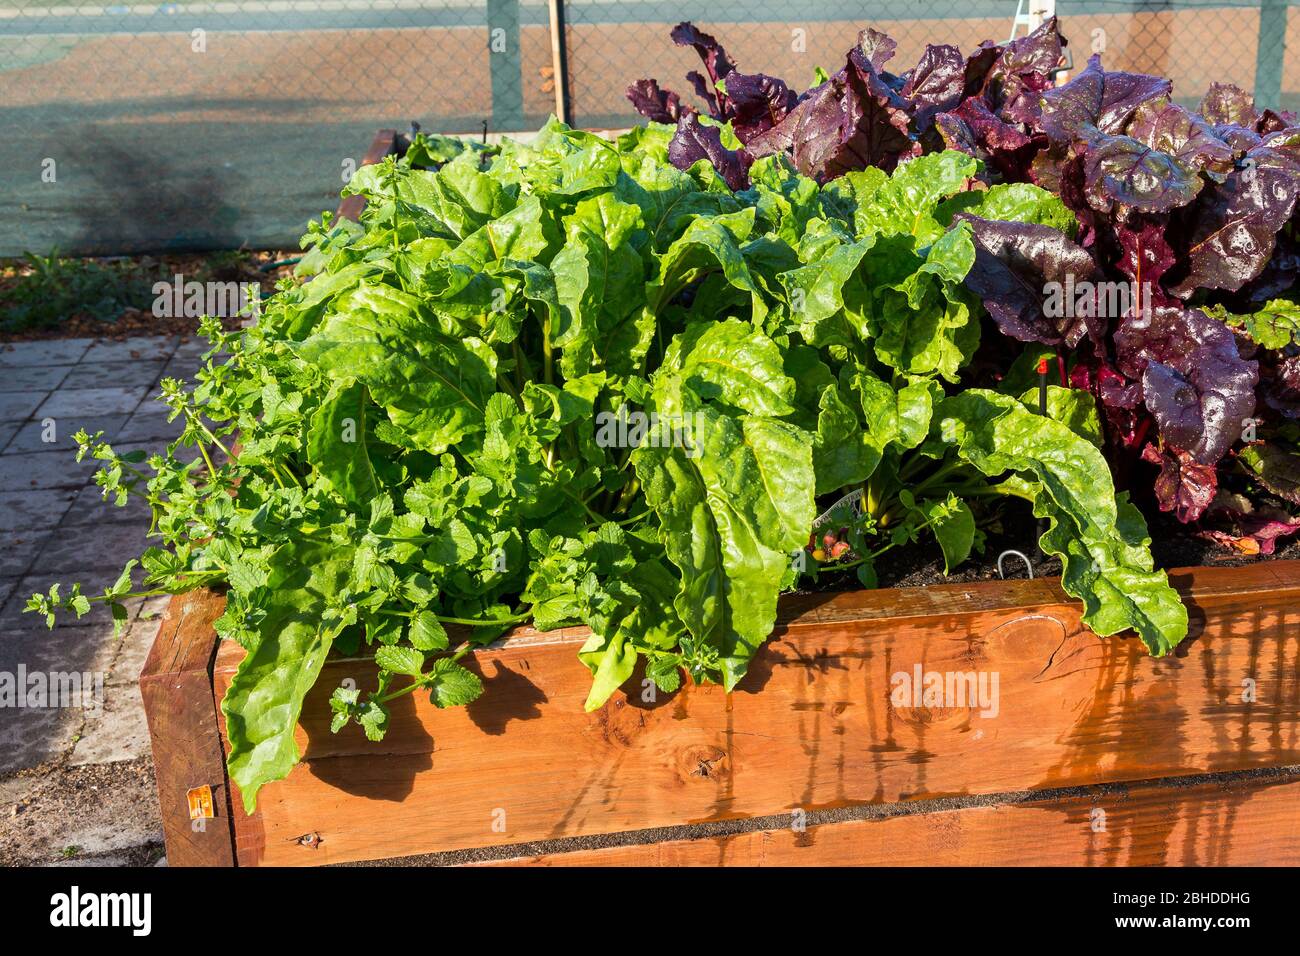 Salad Vegetables growing in large wooden planter Stock Photo